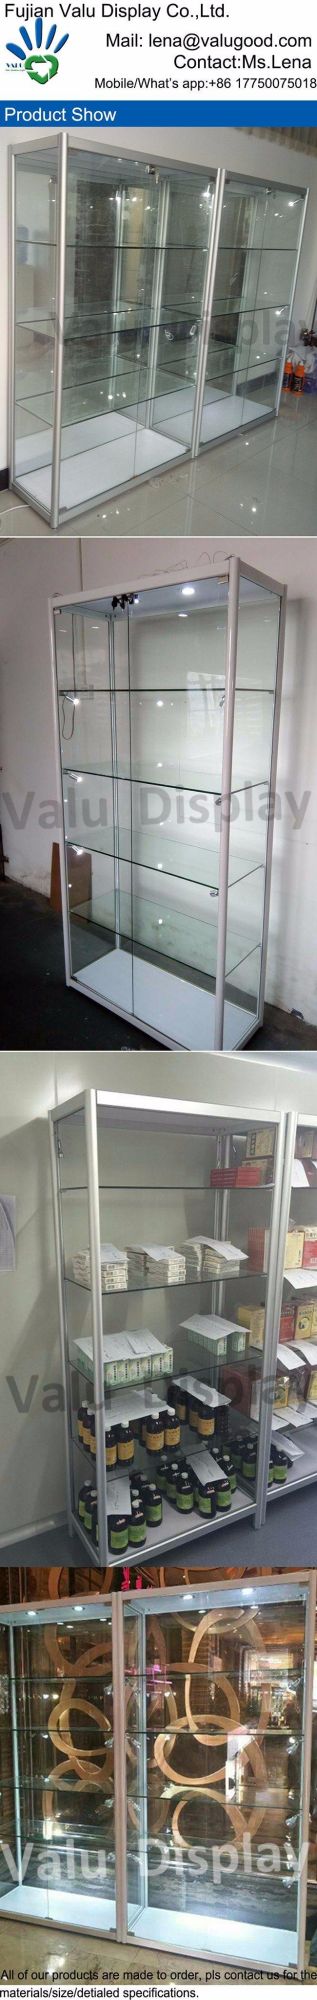 Customized Glass Display Cabinet for Store with Lock